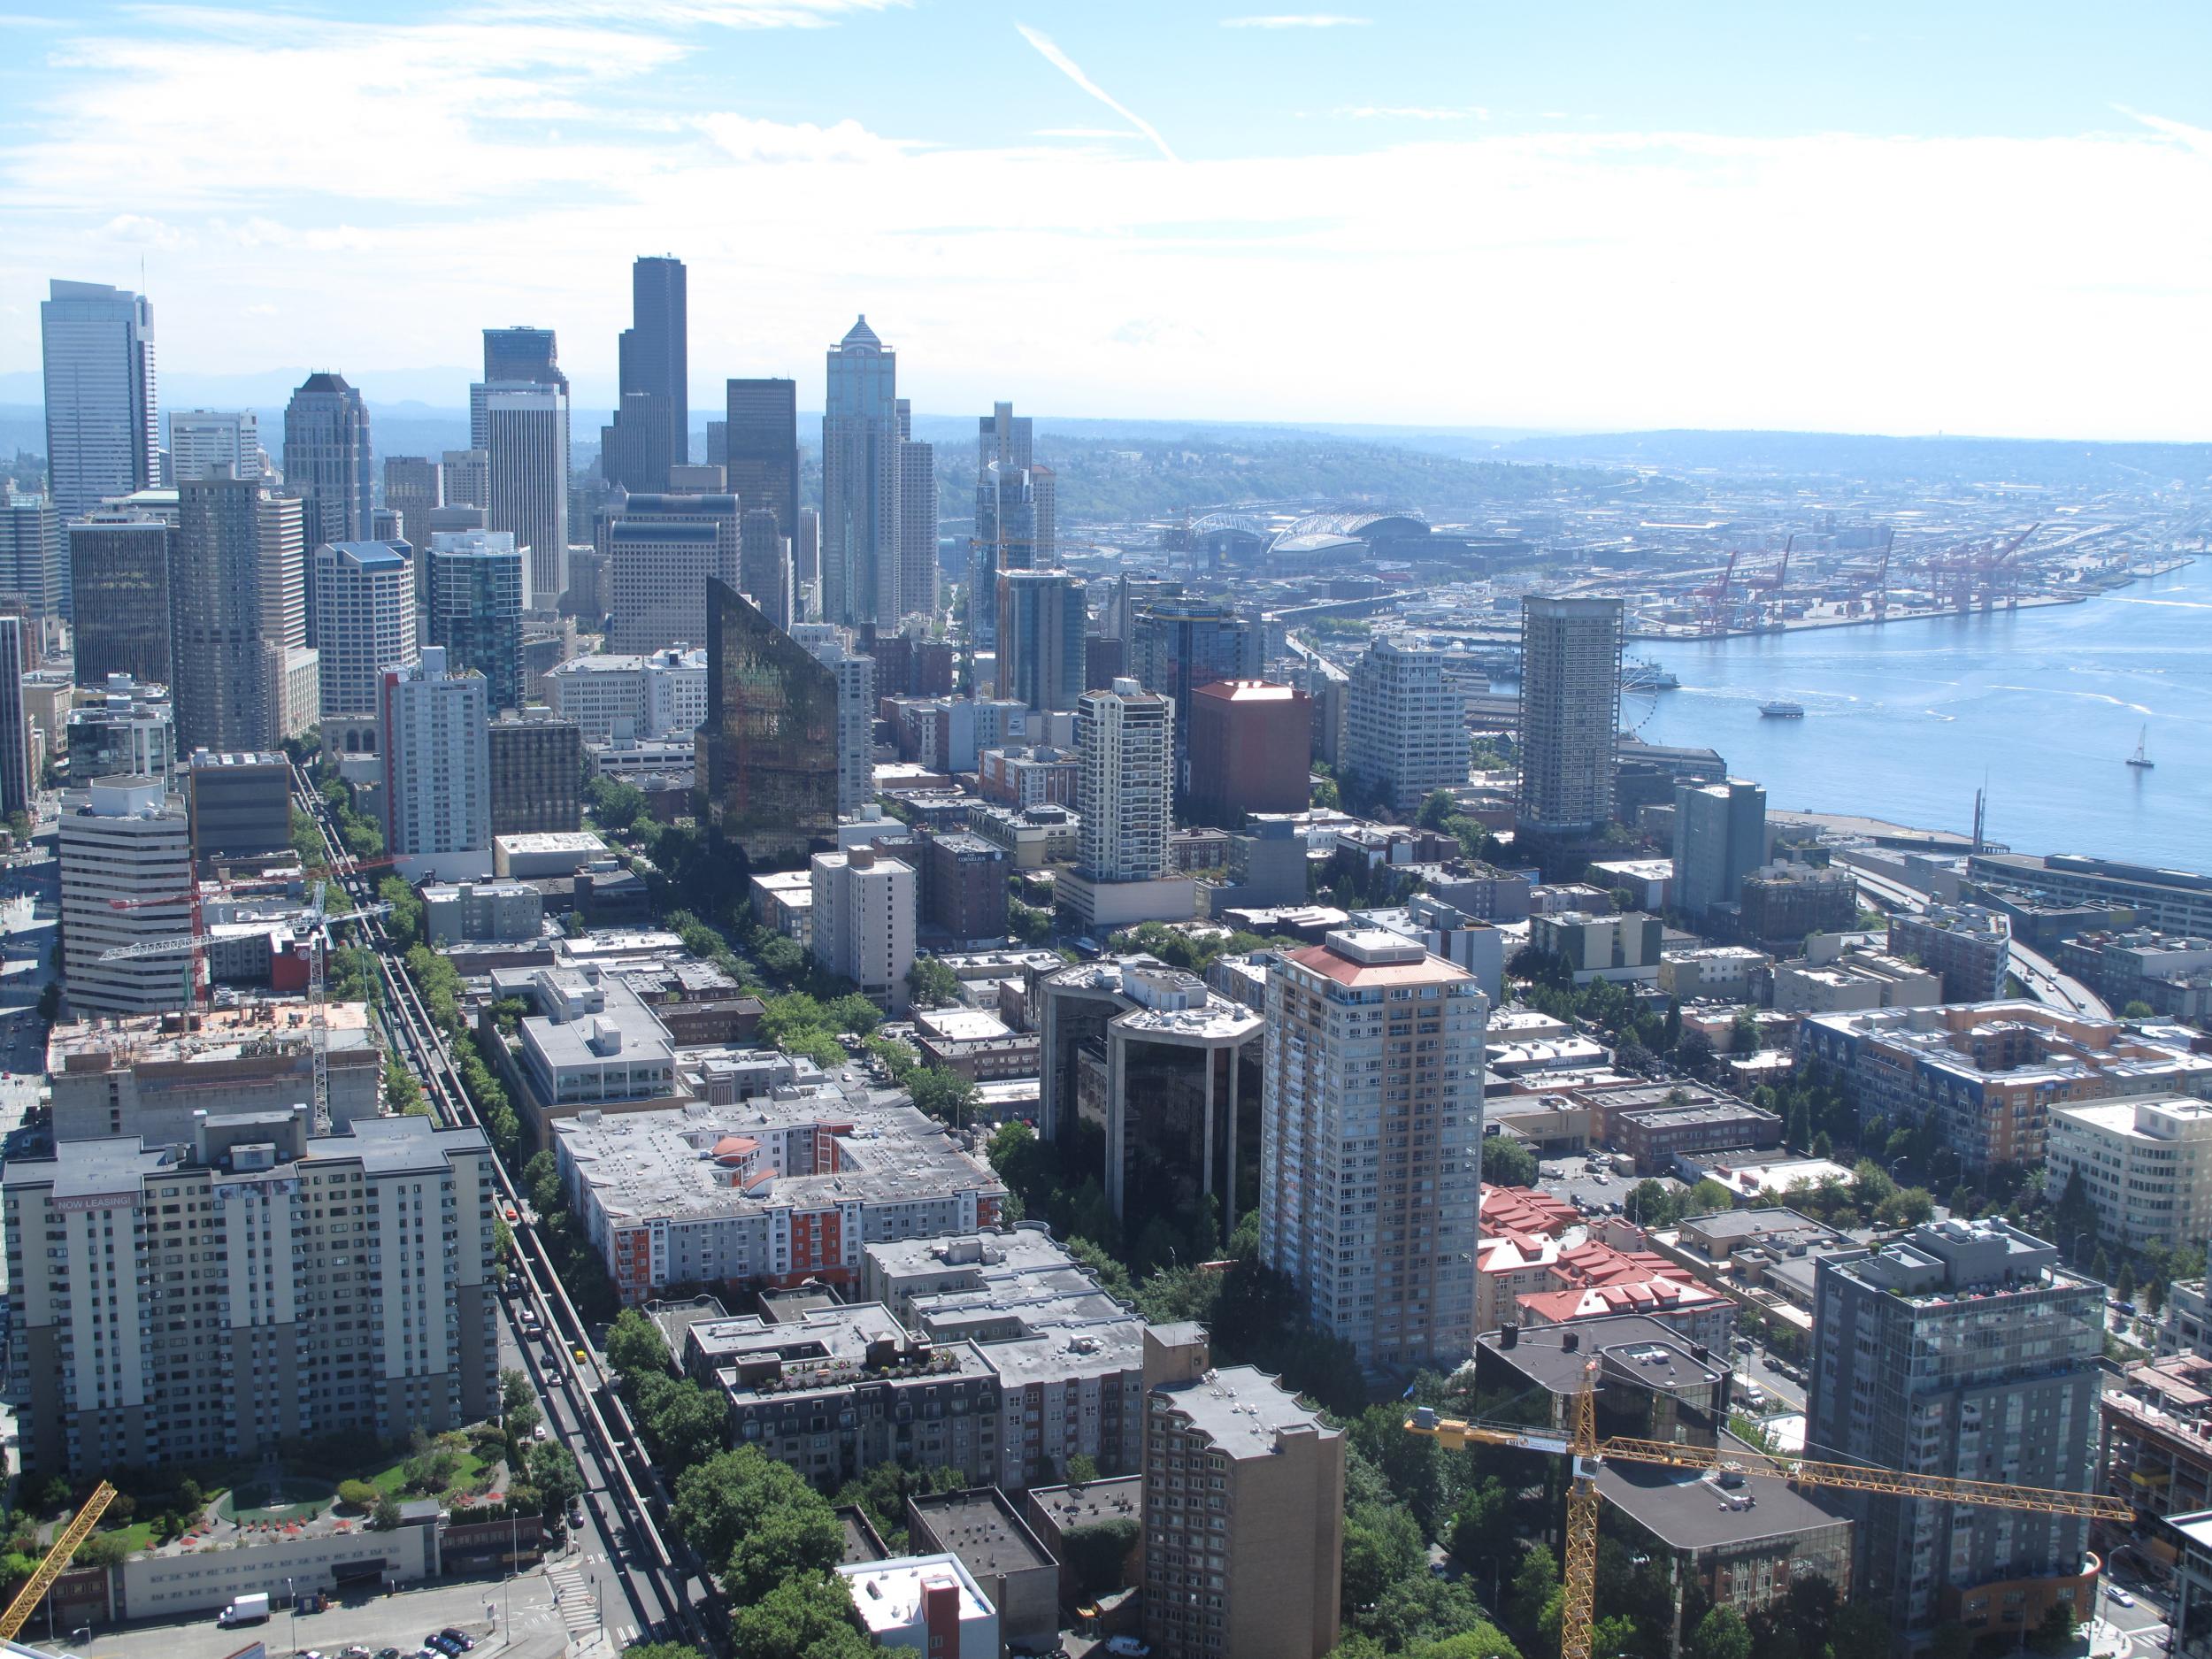 Seattle is known as a 'sanctury city'